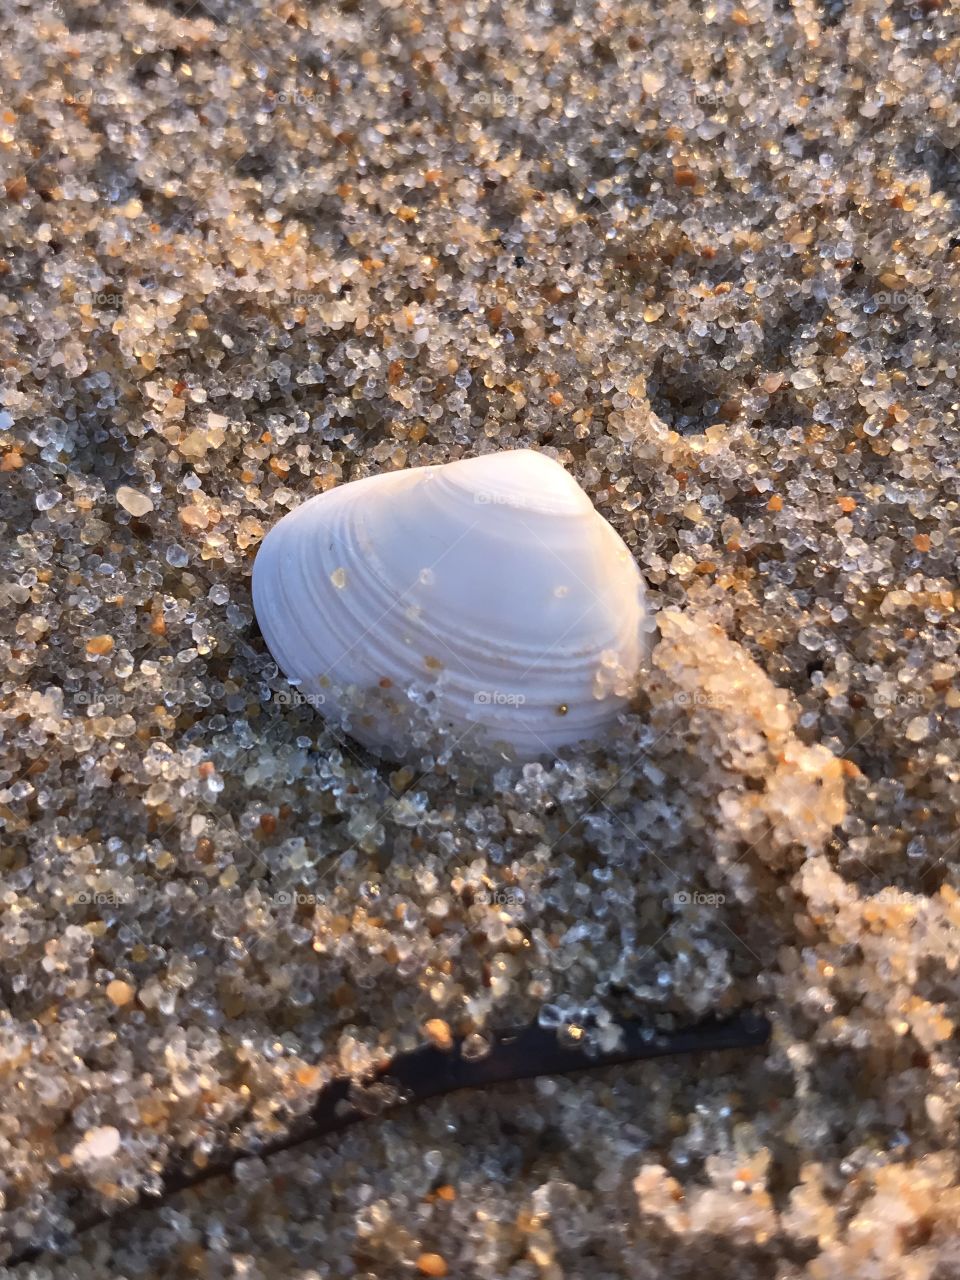 Tiny little white seashell buried in the sand along the shore of the beach. 